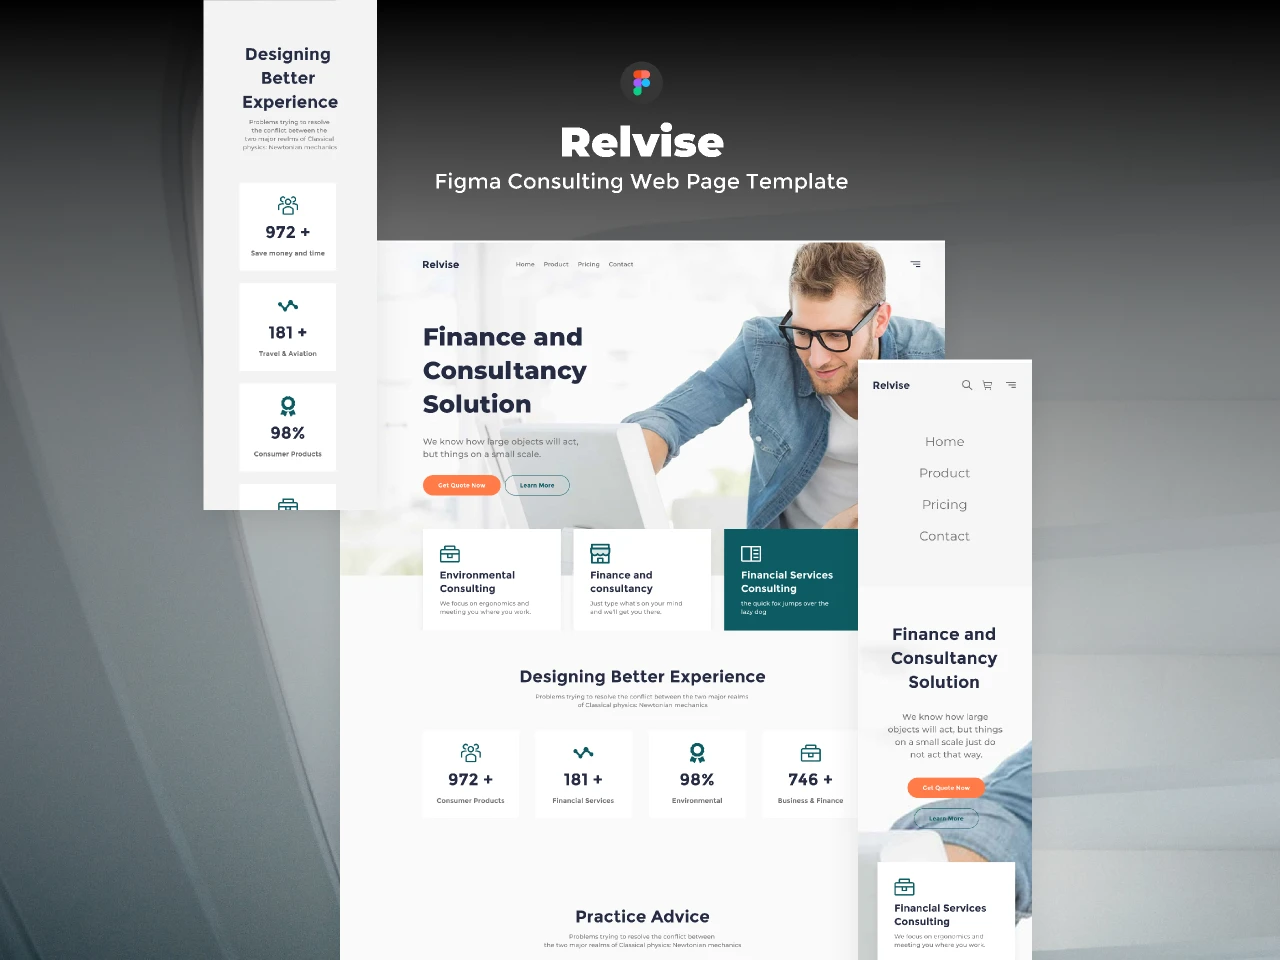 Relvise - Figma Consulting Web Page Template for Figma and Adobe XD